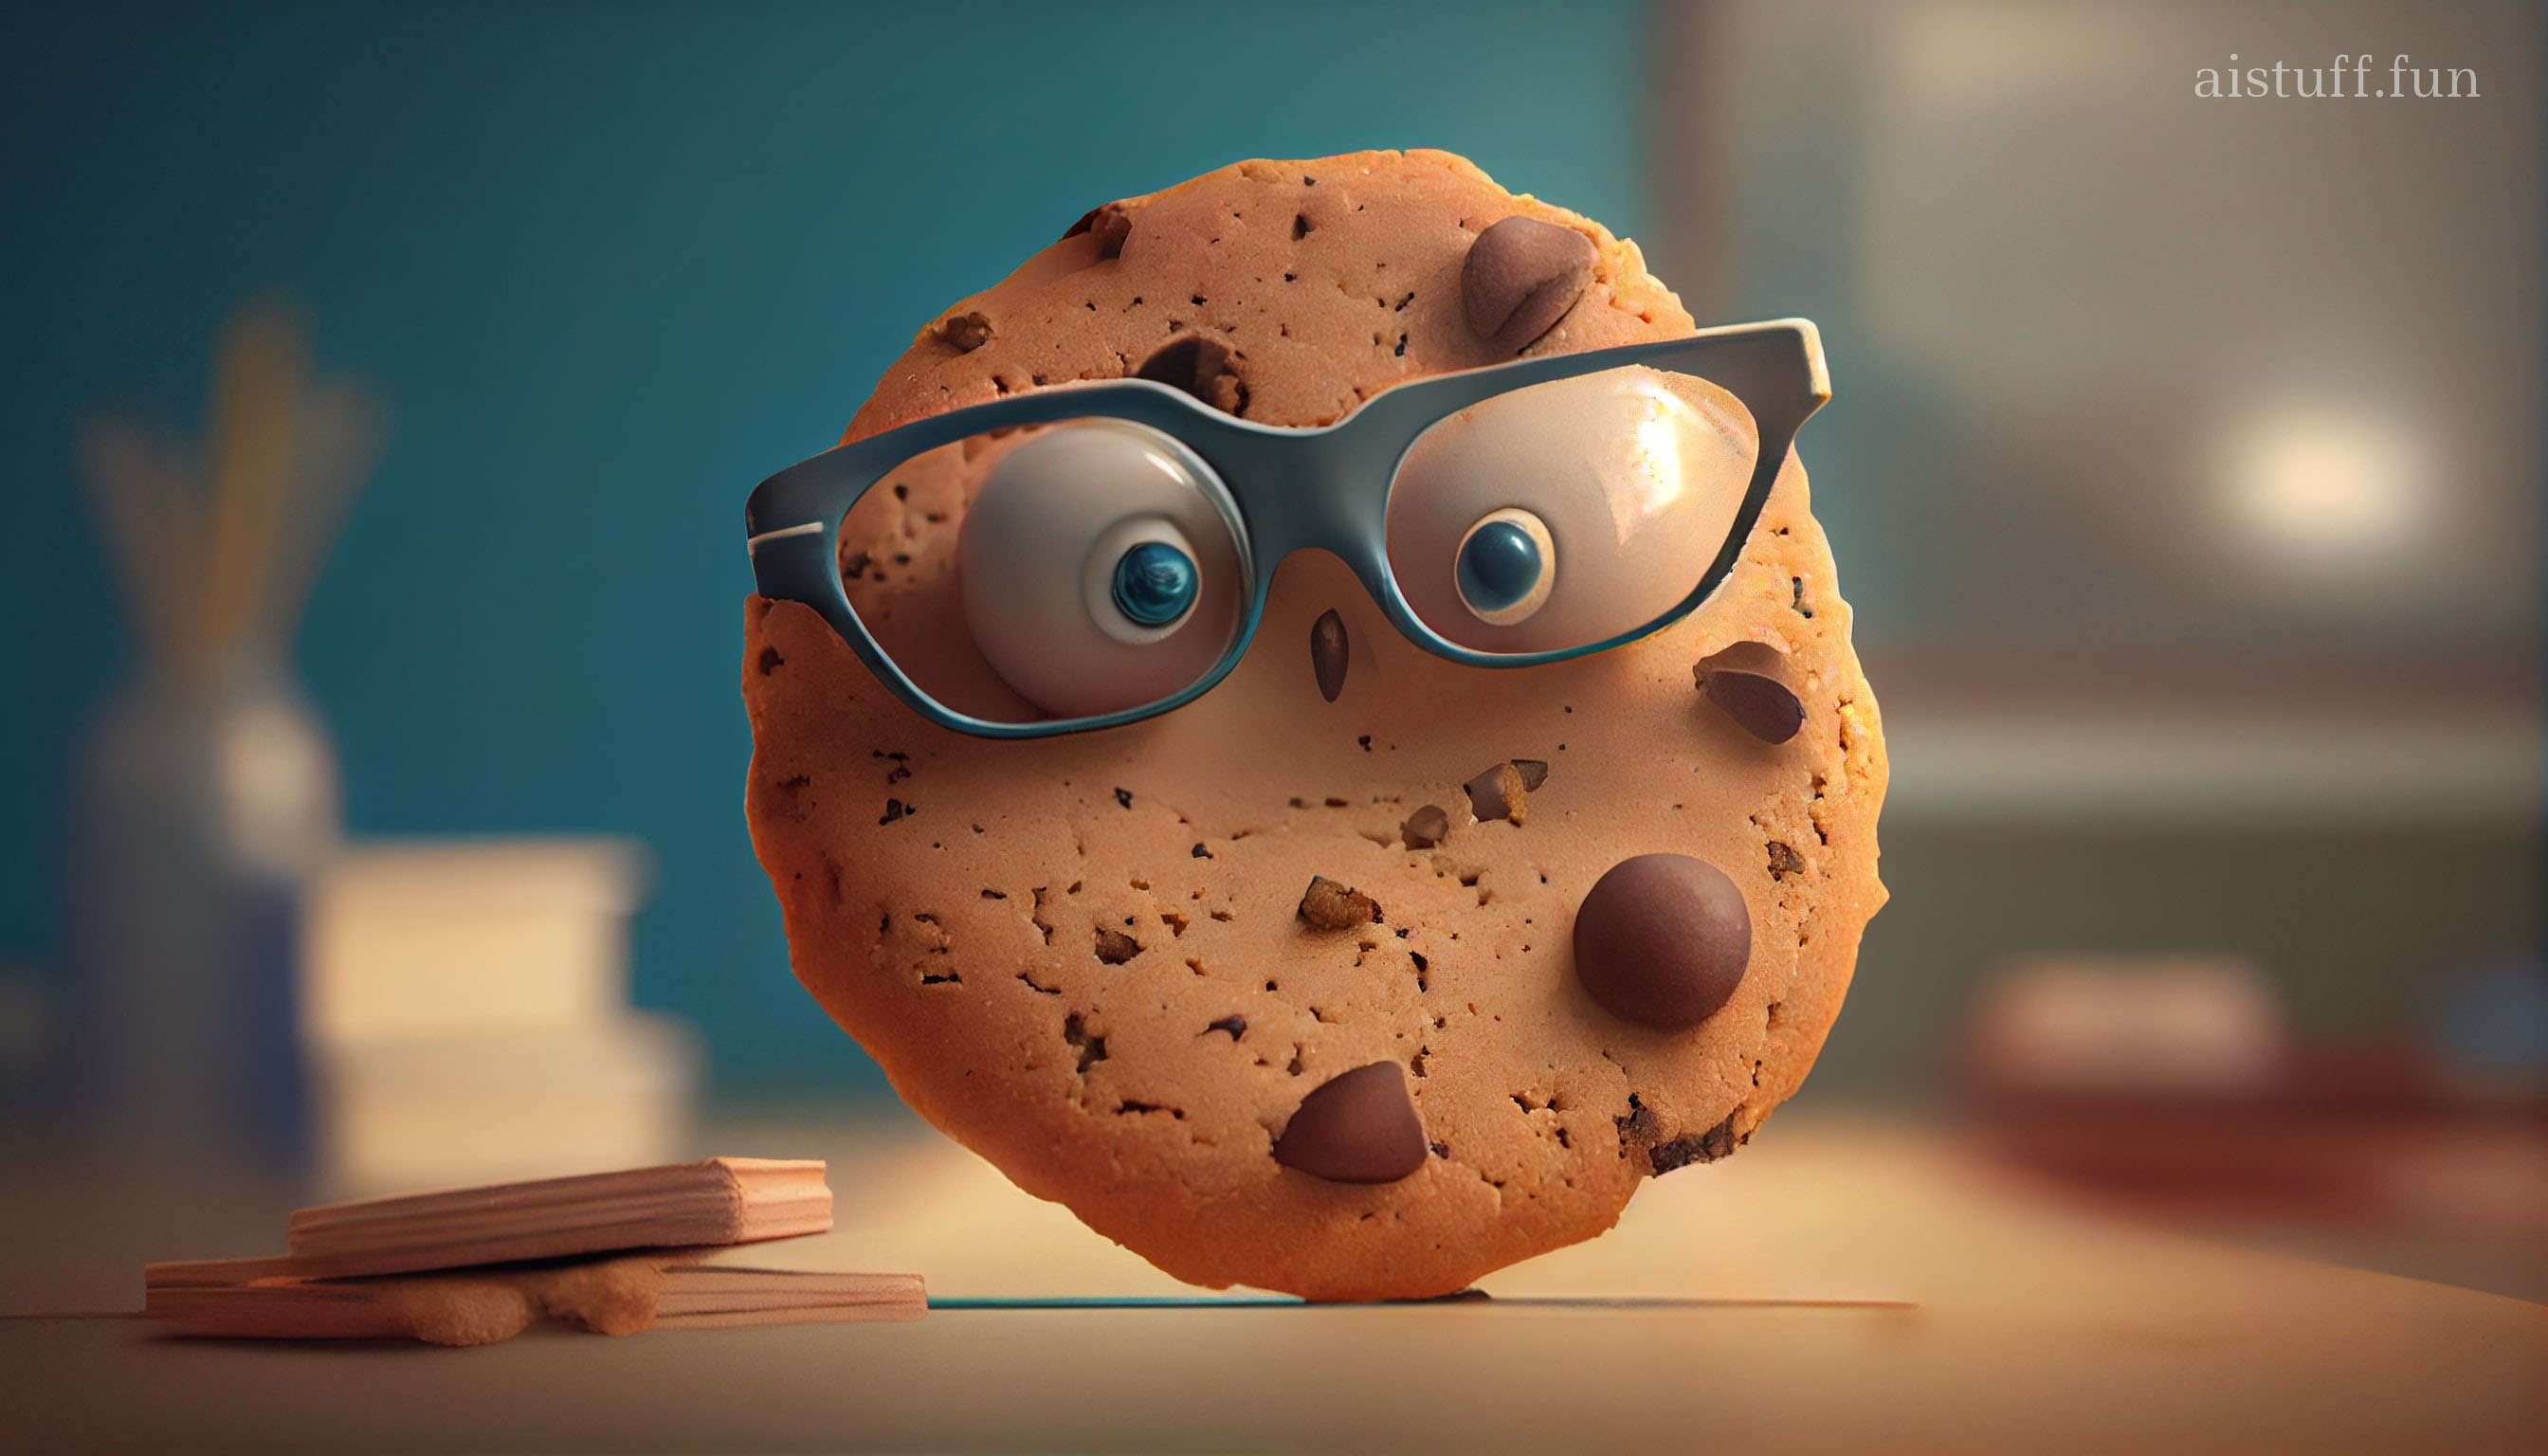 A smart cookie